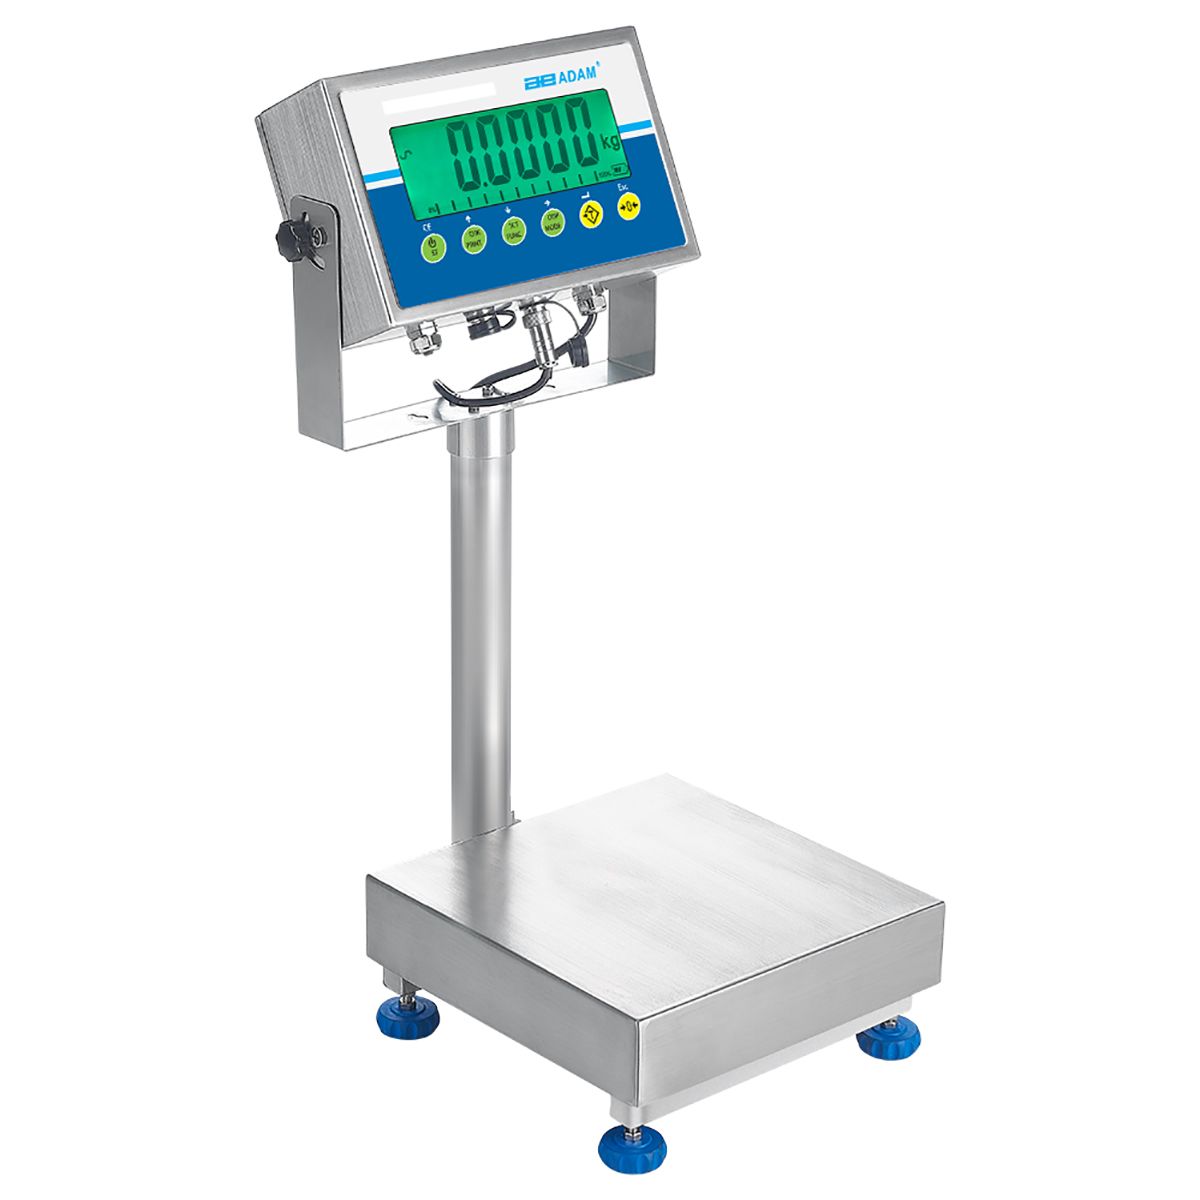 Adam Equipment Co Ltd Weighing Scale, 35kg Weight Capacity Type C - European Plug, Type G - British 3-pin, With RS